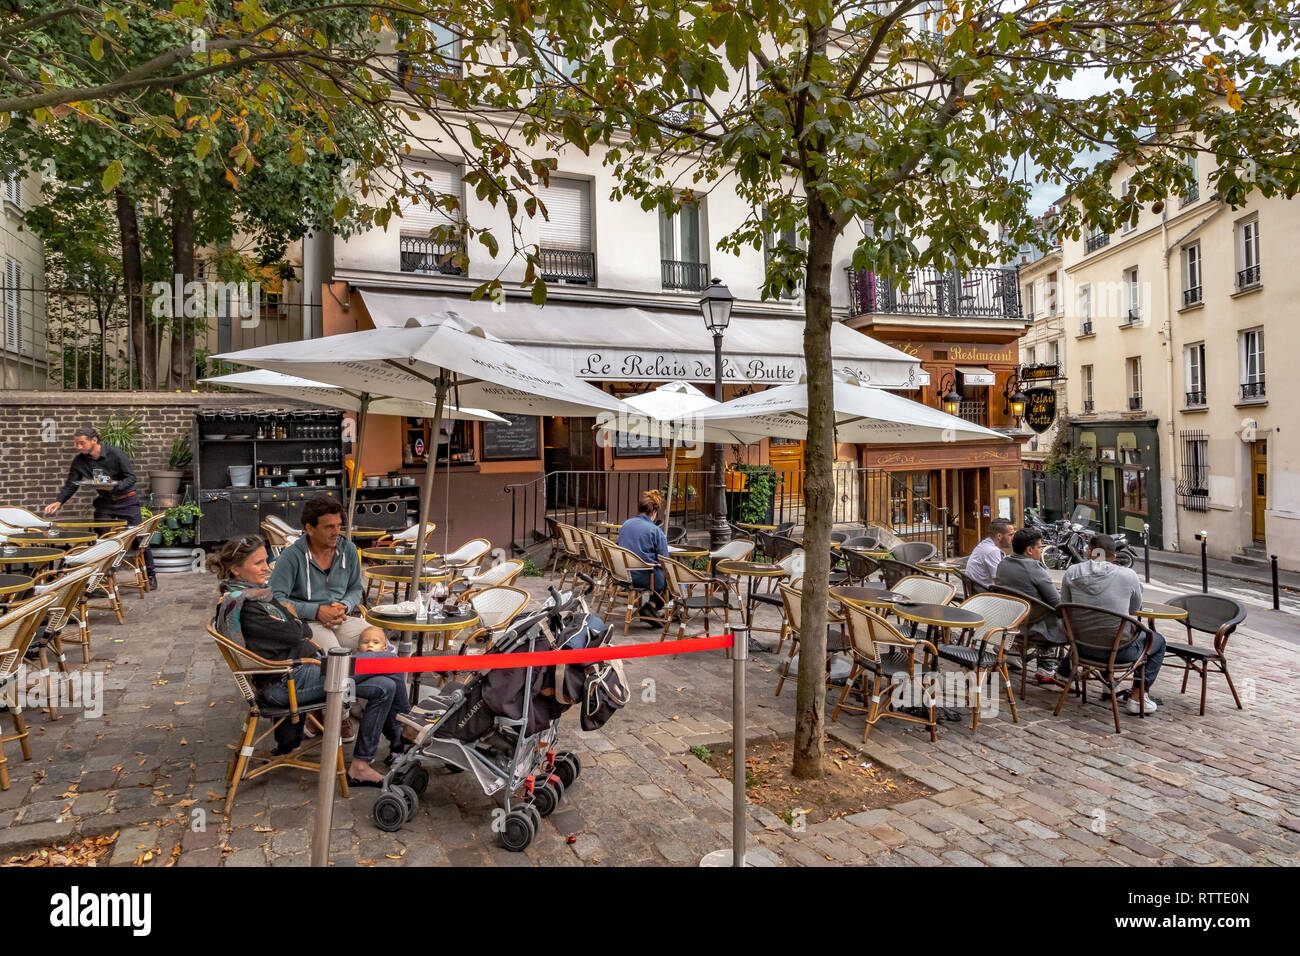 A couple with a baby relaxing at  a table outside Restaurant  Le Relais de la butte ,whilst a waiter takes an order ,a restaurant in Montmartre, Paris Stock Photo